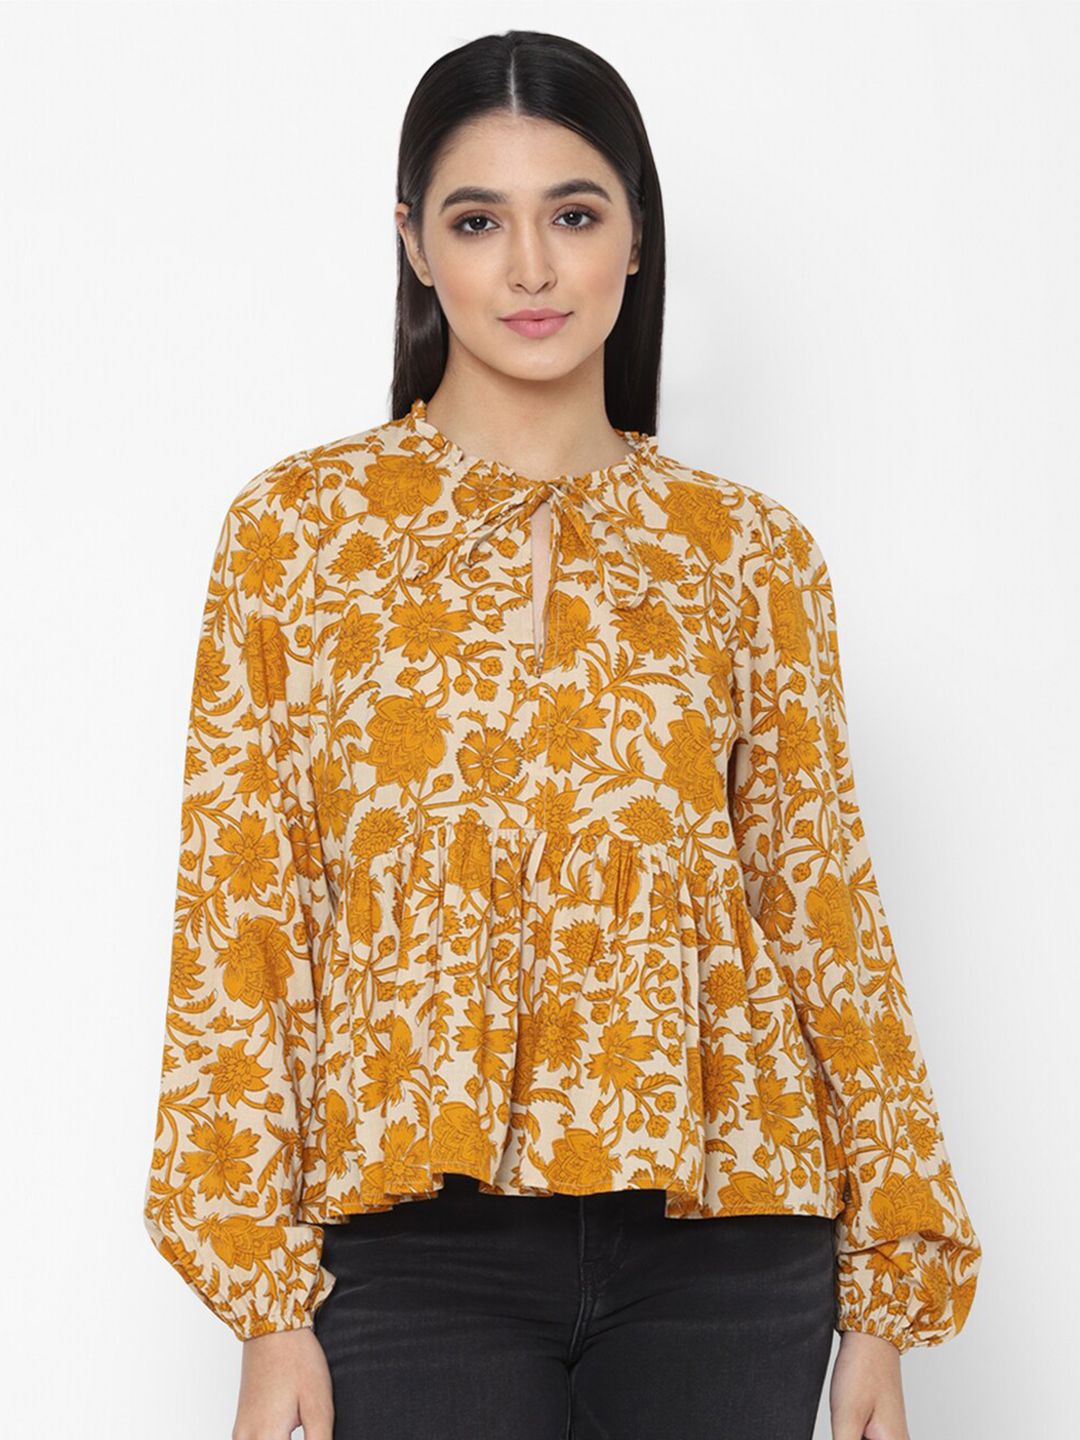 AMERICAN EAGLE OUTFITTERS Women White & Yellow Floral Printed Pure Cotton Tie-Up Neck Top Price in India